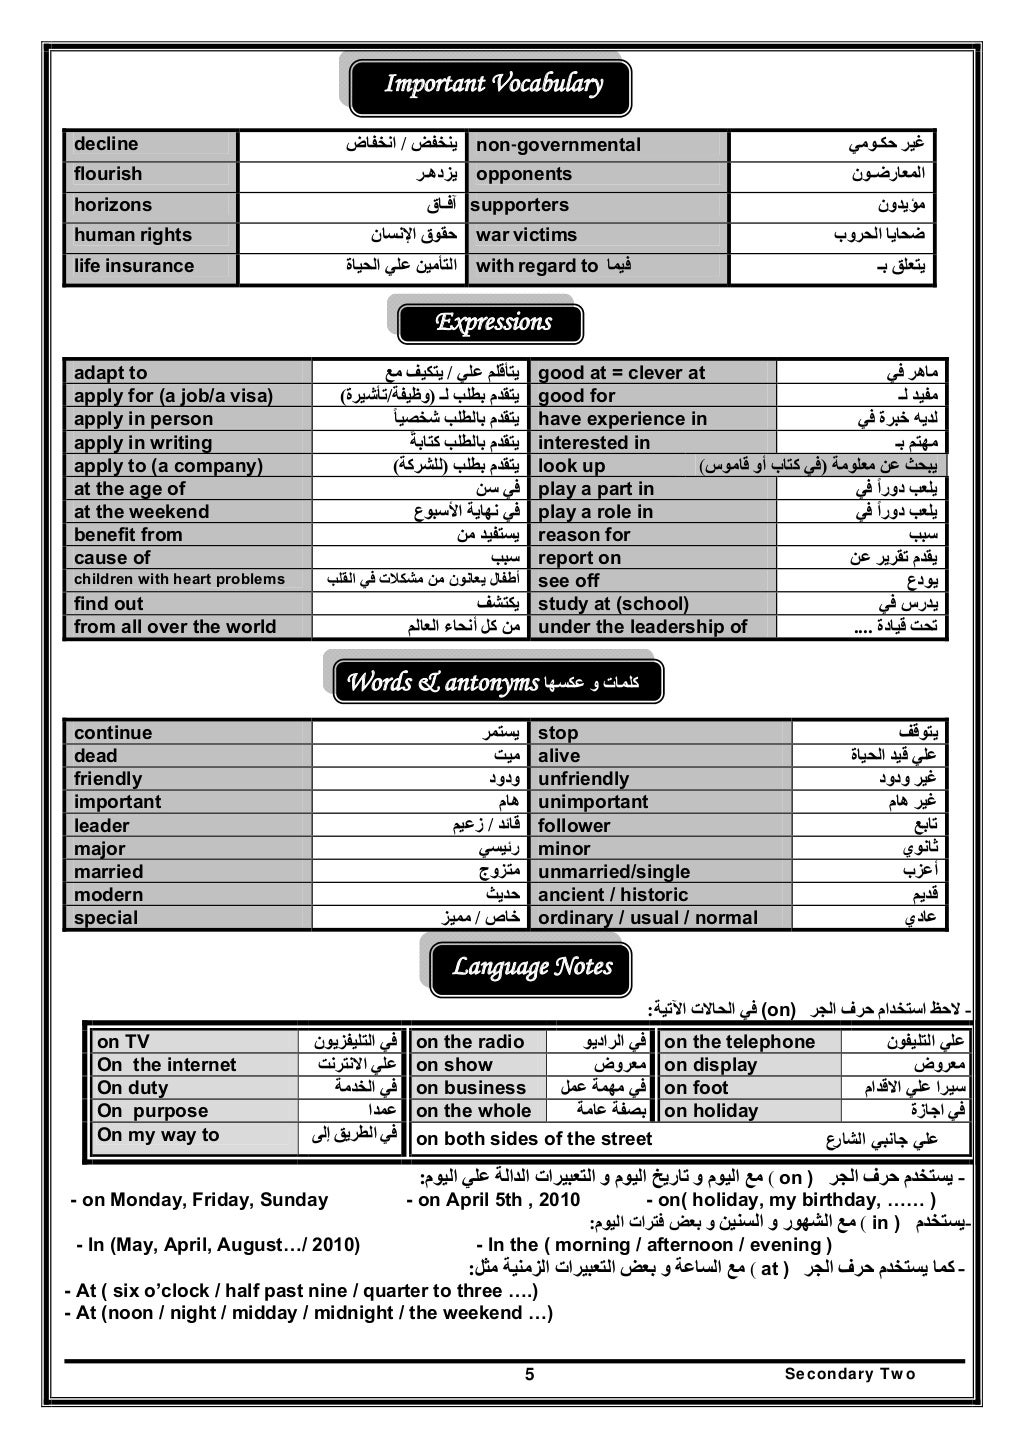 Secondary Two6
- Qualify as ‫كـ‬ ‫يتأھل‬)‫الوظيفة‬ ‫بعدھا‬ ‫يأتي‬( -He qualified as a teacher two years ago.
- Qualify in ...